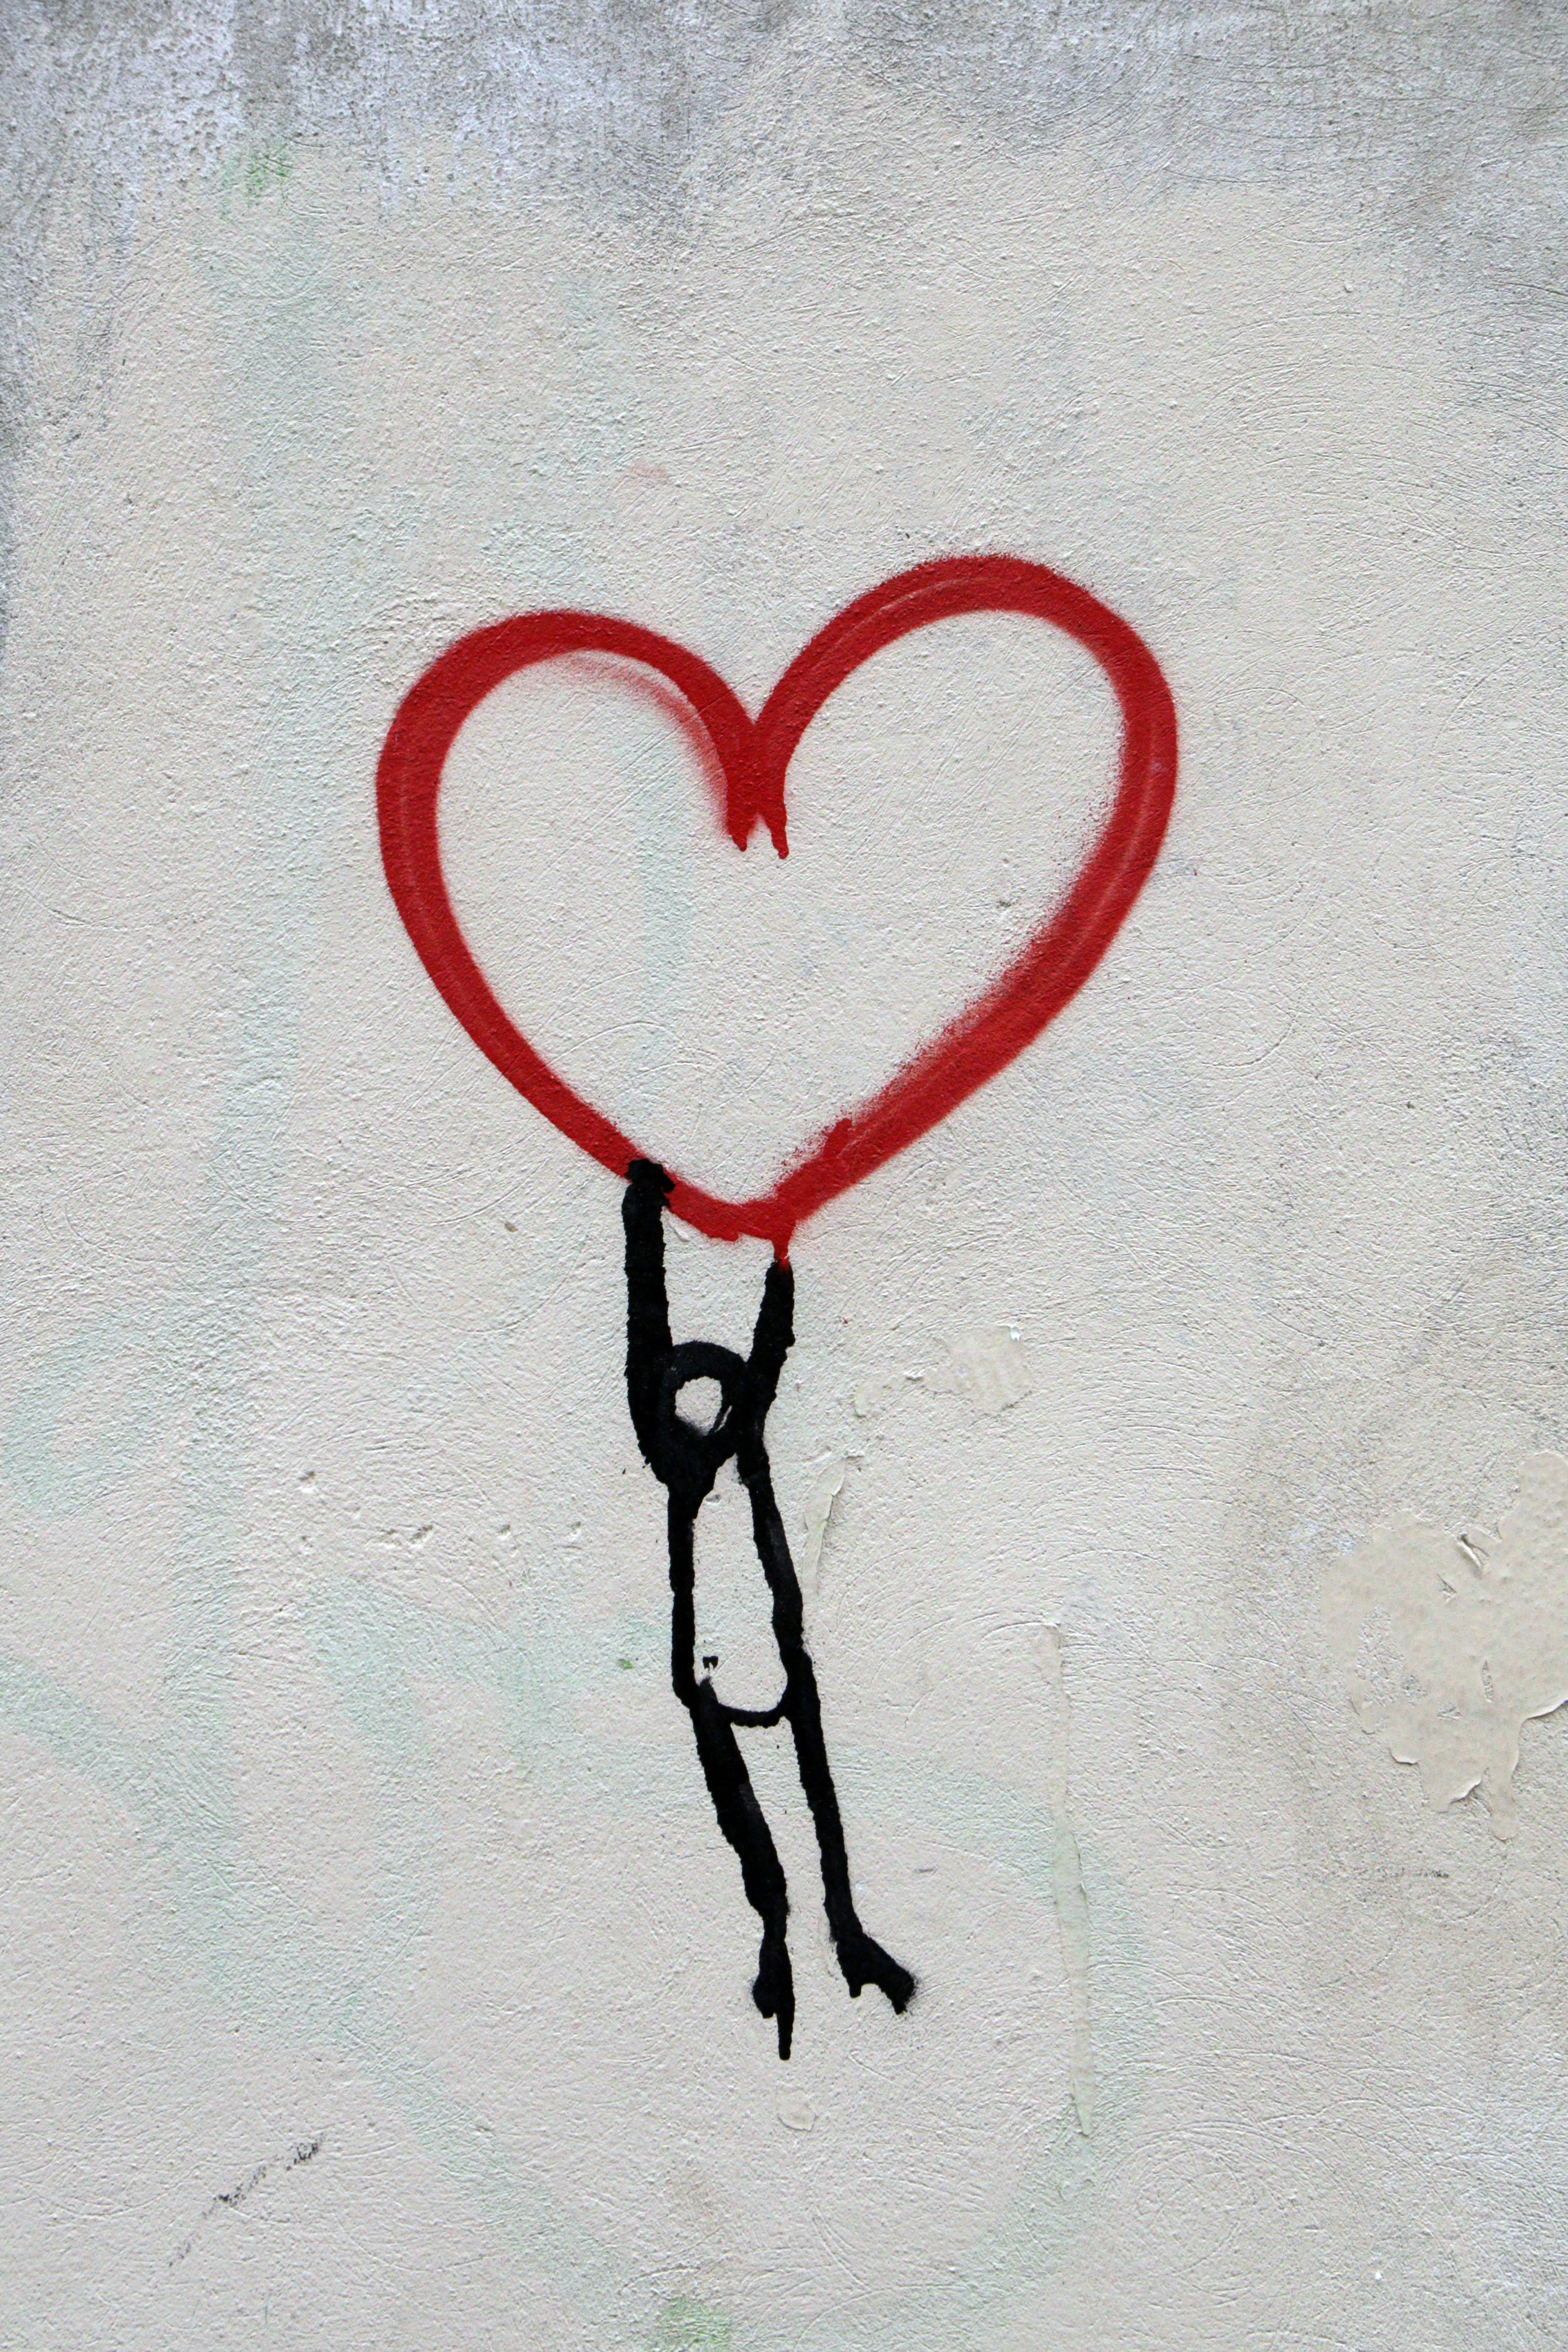 A drawing of a red heart with a stick person hanging on to the bottom of the heart